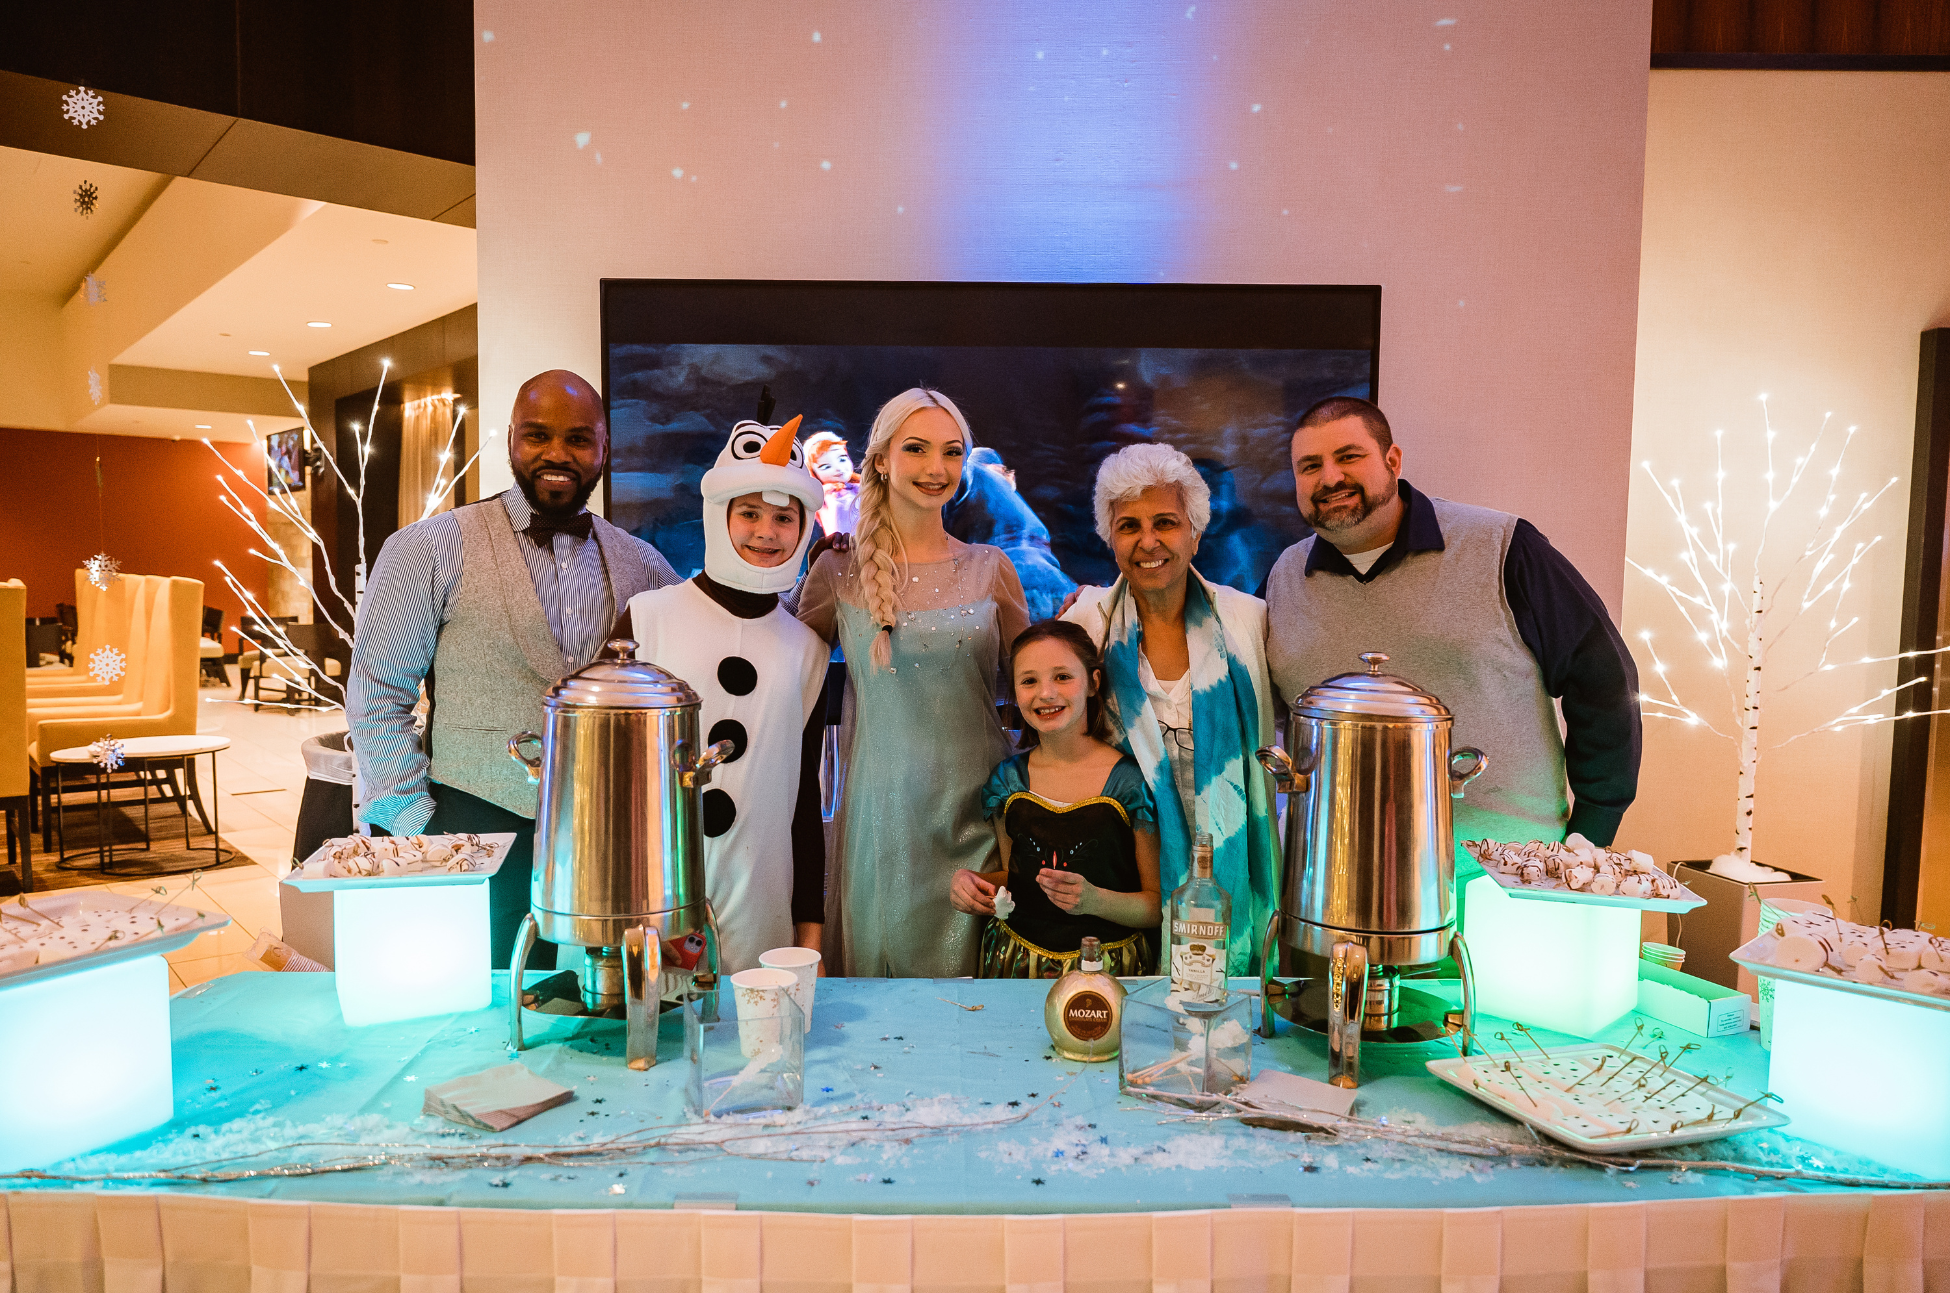 Six hotel staff members dressed up as characters from the movie Frozen, posing for a picture behind a hot chocolate stand in their lobby.